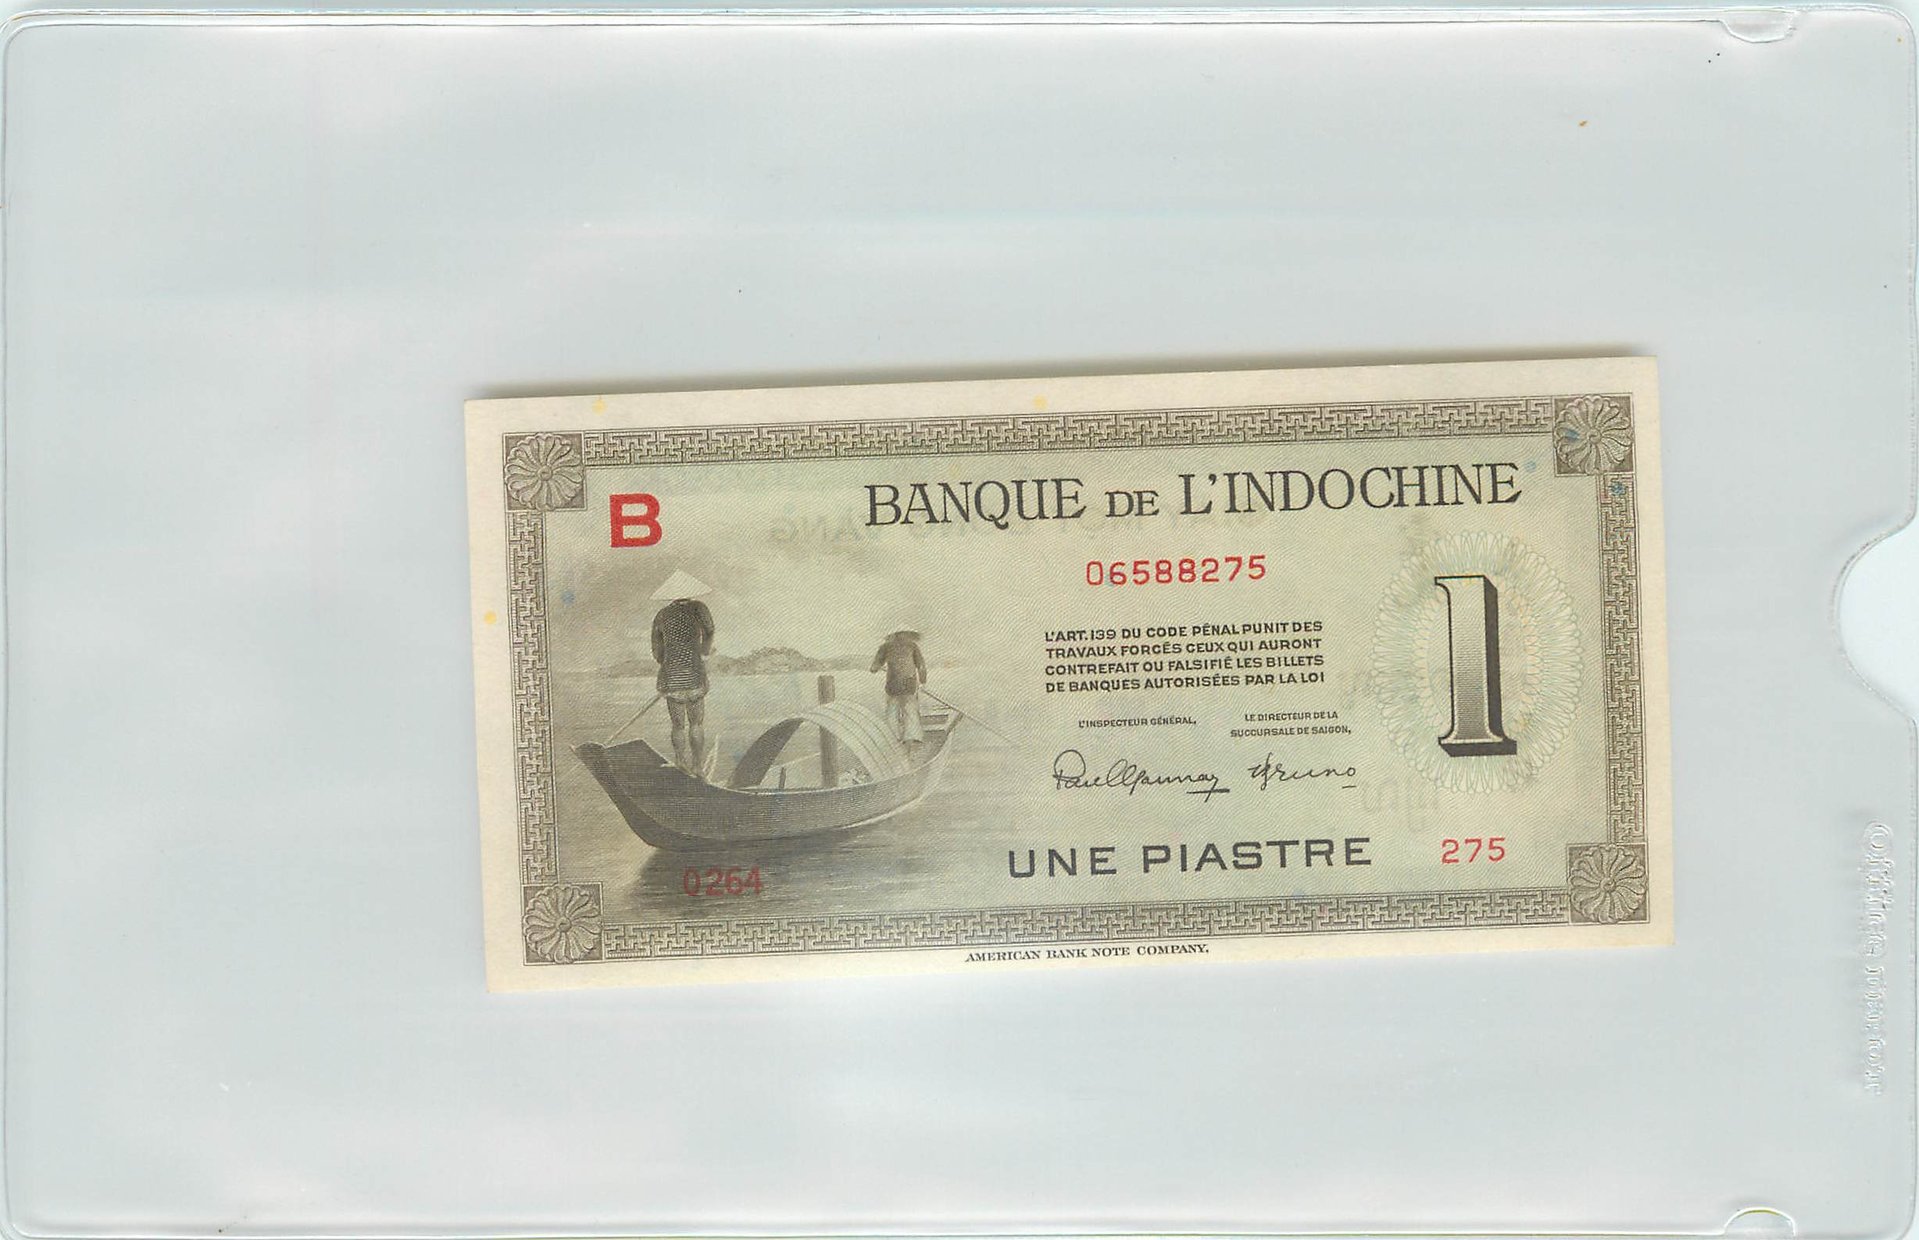 French Indo-China une piastre front 2016_07_29_08_21_290001.jpg